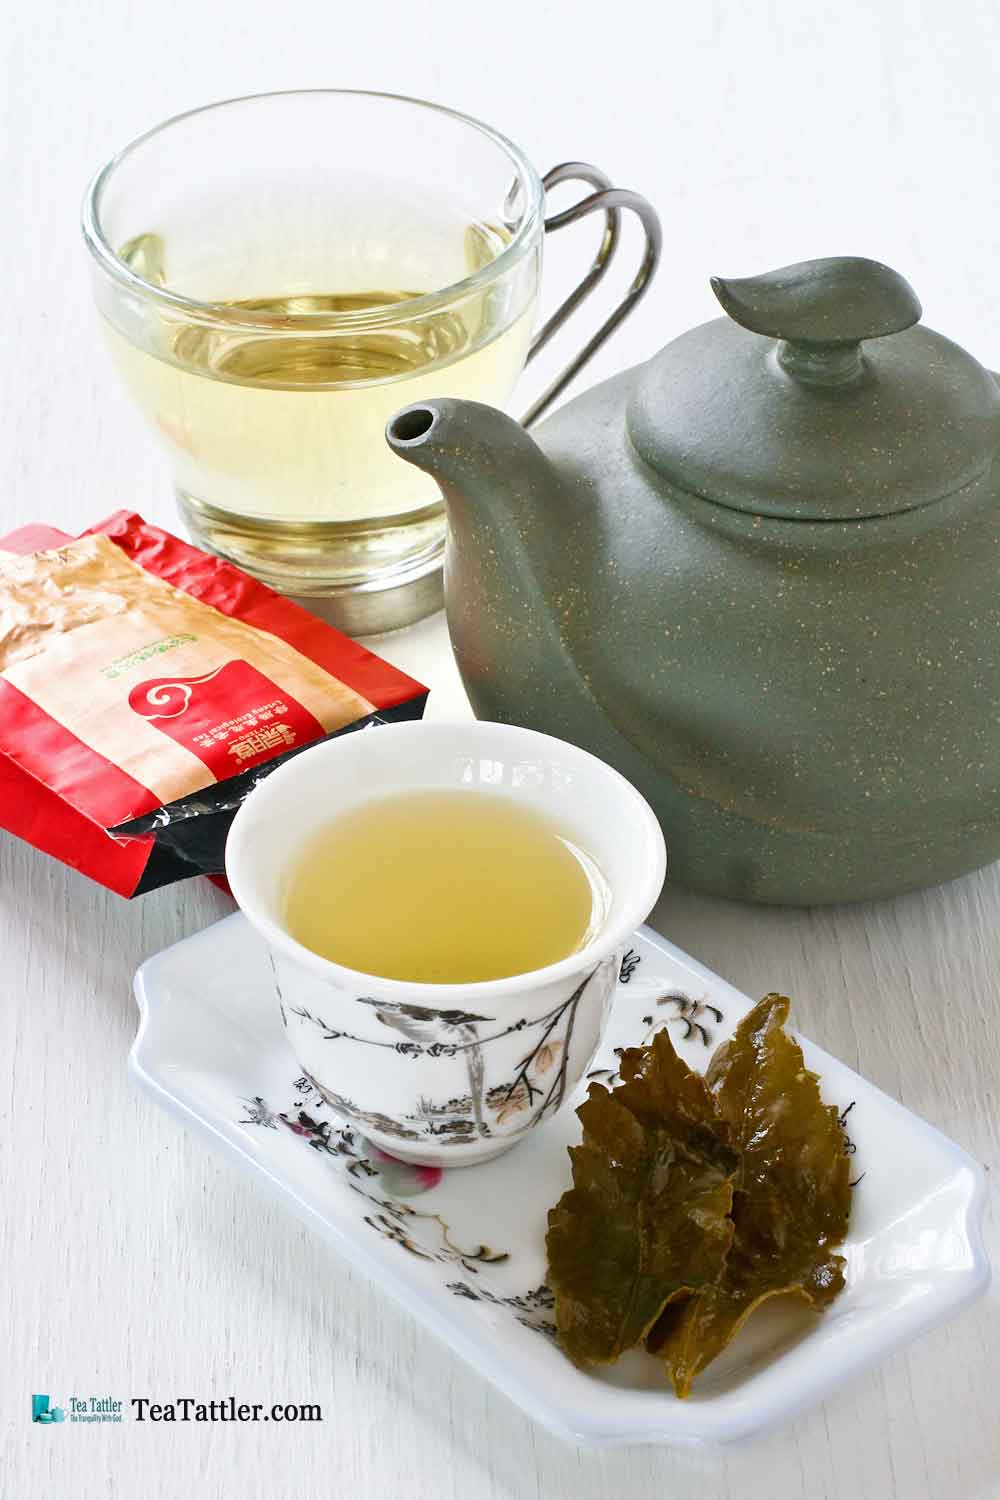 Ti Kwan Yin Oolong is the most renown of all Chinese oolongs. It has a pale, fragrant, smooth yellow liquor with a slightly sweet aftertaste. | TeaTattler.com #tikwanyin #tiequanyin #goddessofmercytea #oolongtea